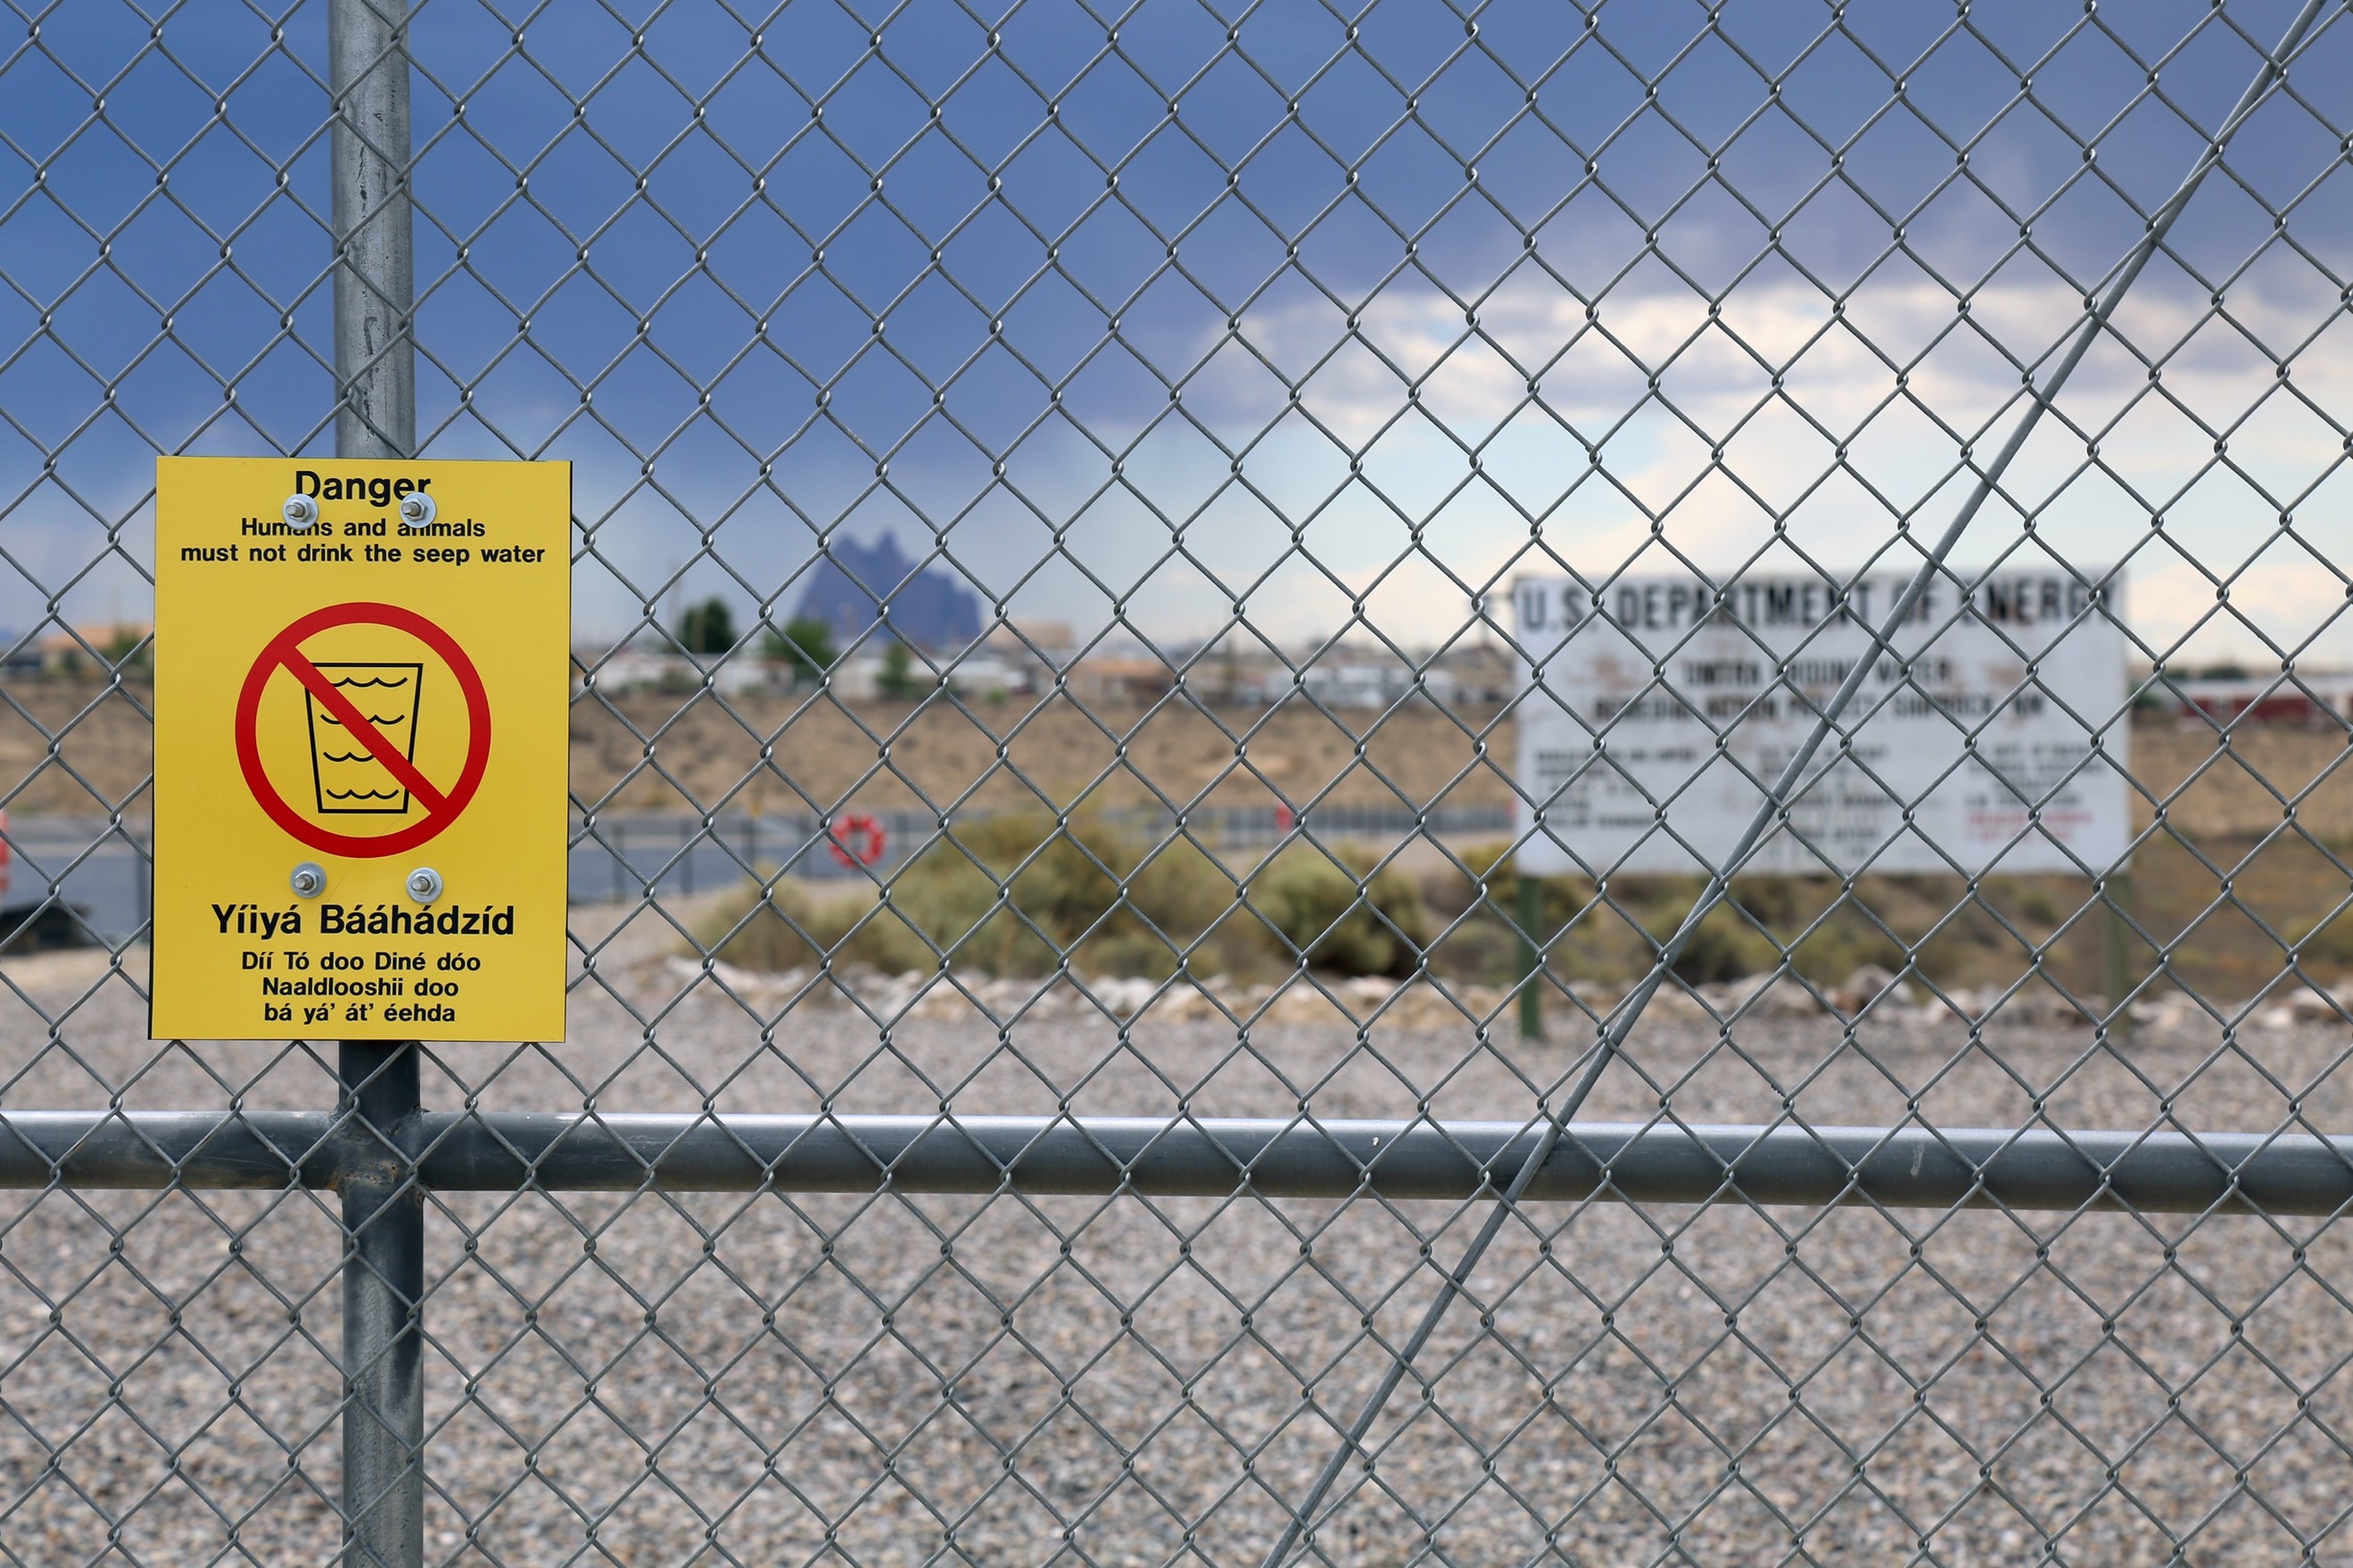 Image: A U.S. Department of Energy Site on the Navajo Nation in 2016. Photo by Teresa Montoya